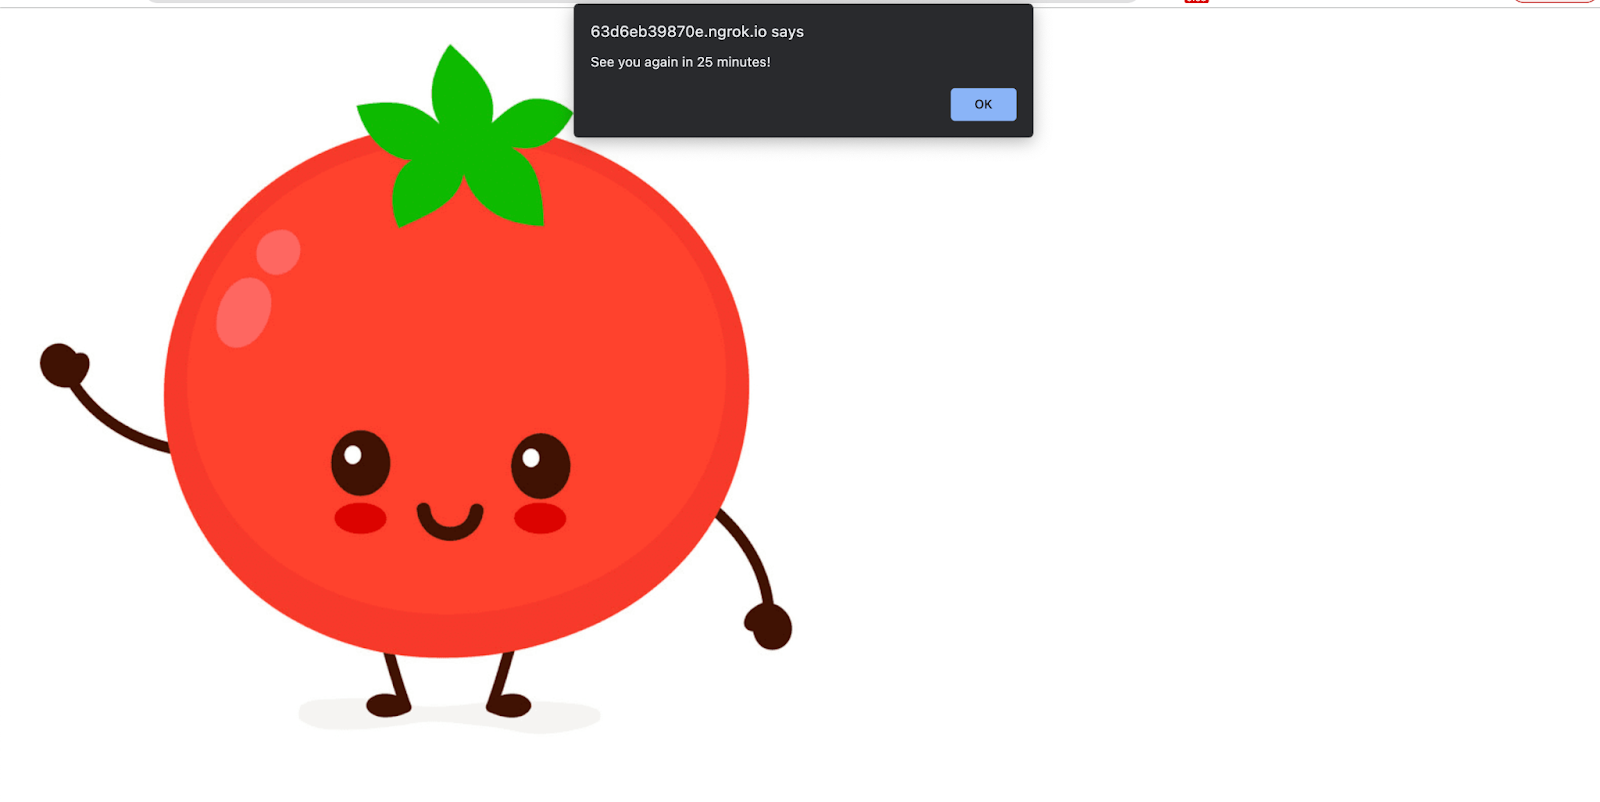 screenshot of webpage with giant tomato and alert message